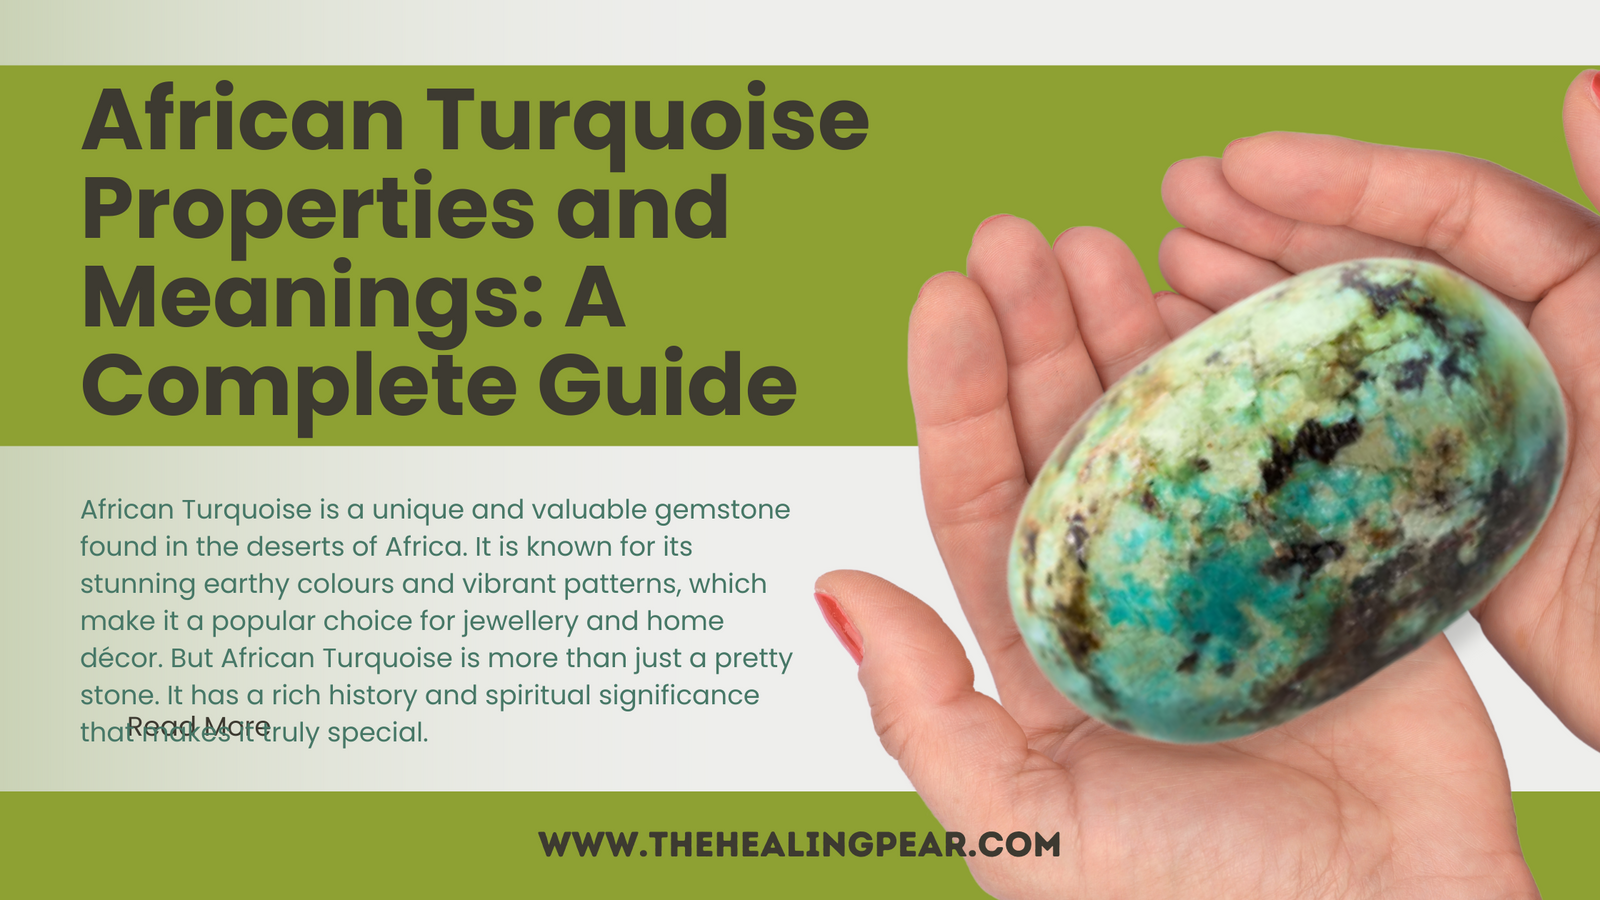 African Turquoise Properties